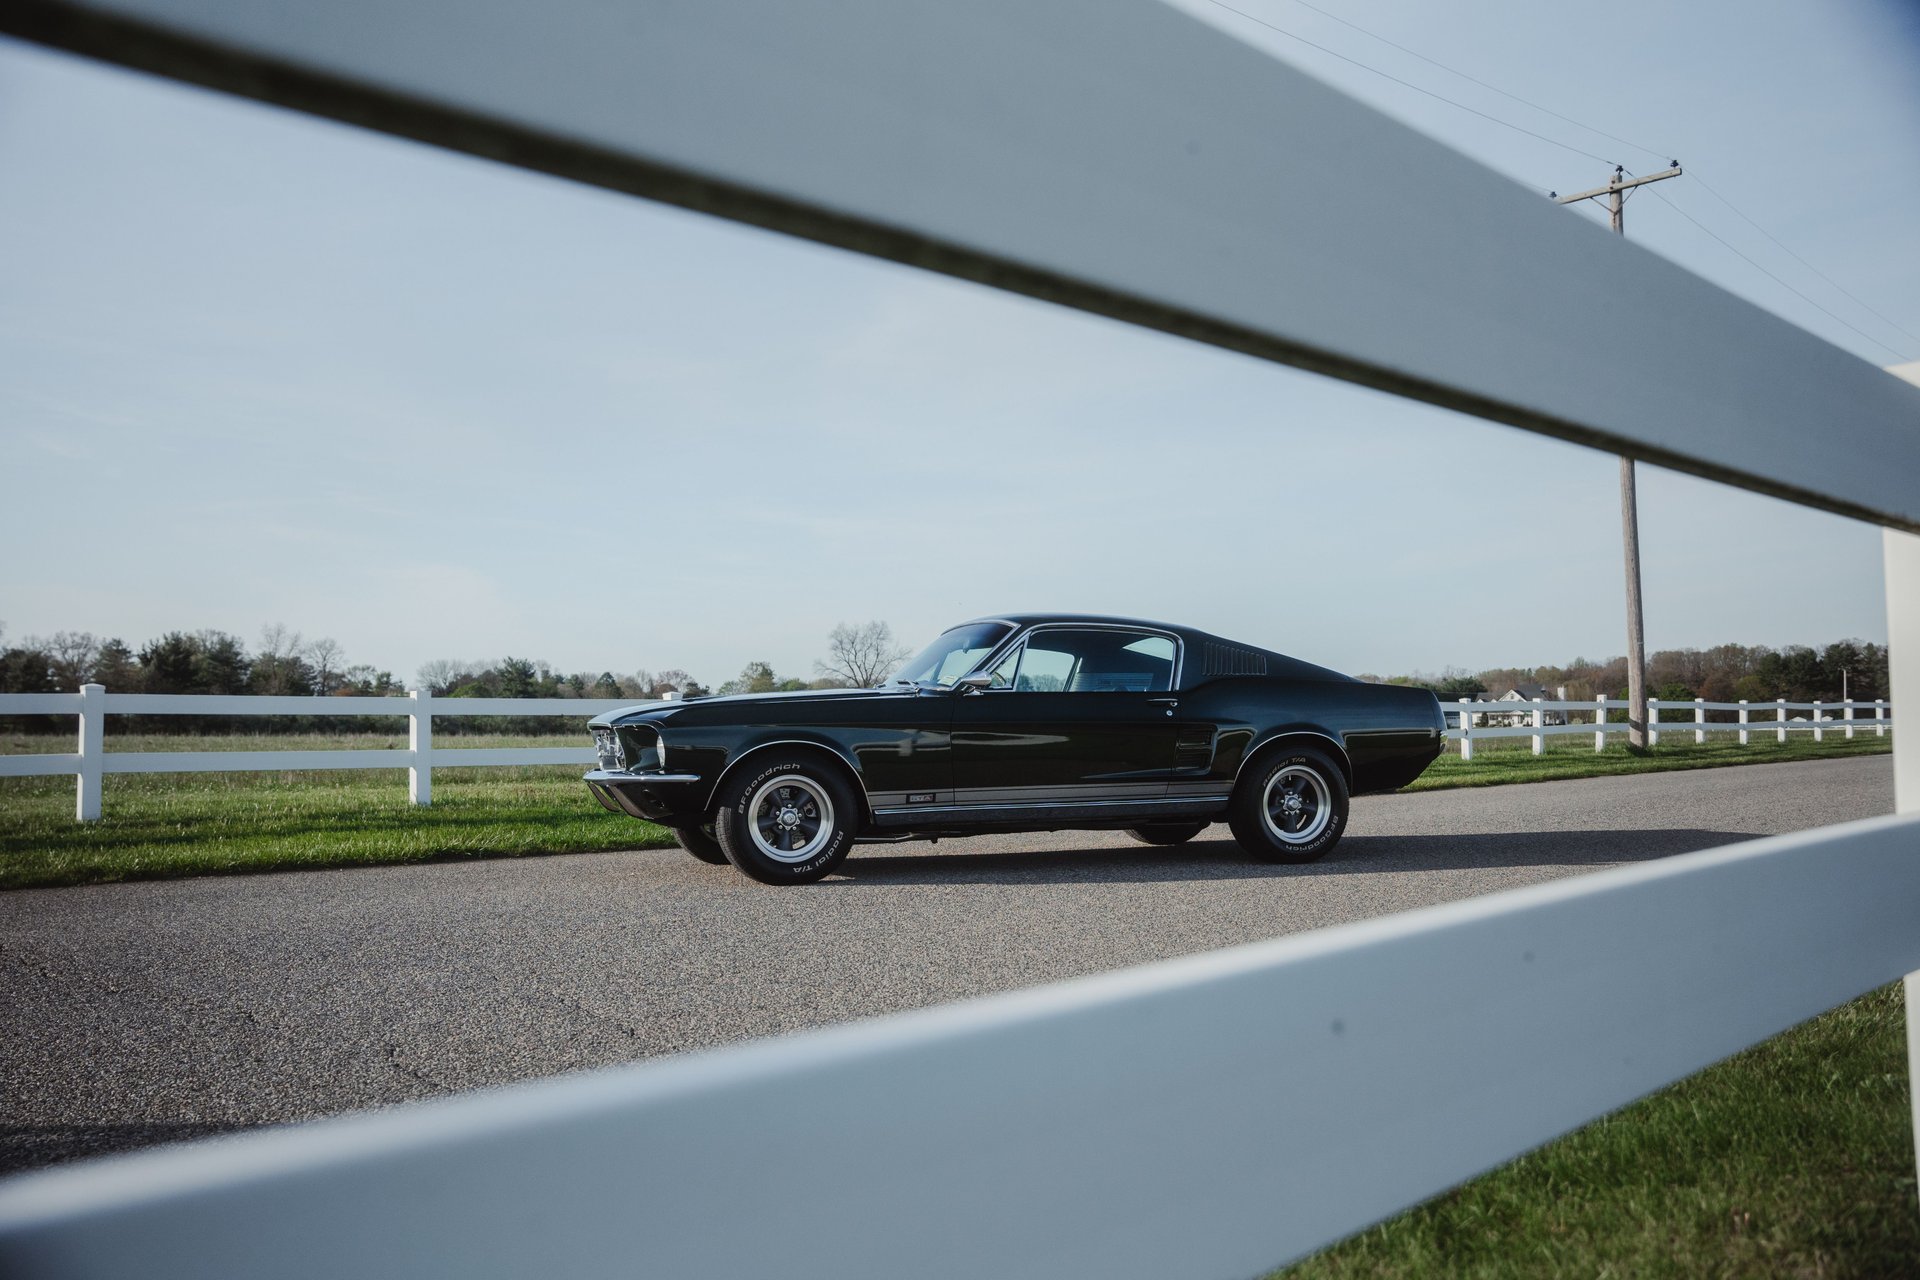 For Sale 1967 Ford Mustang GTA 390 S Code Fastback